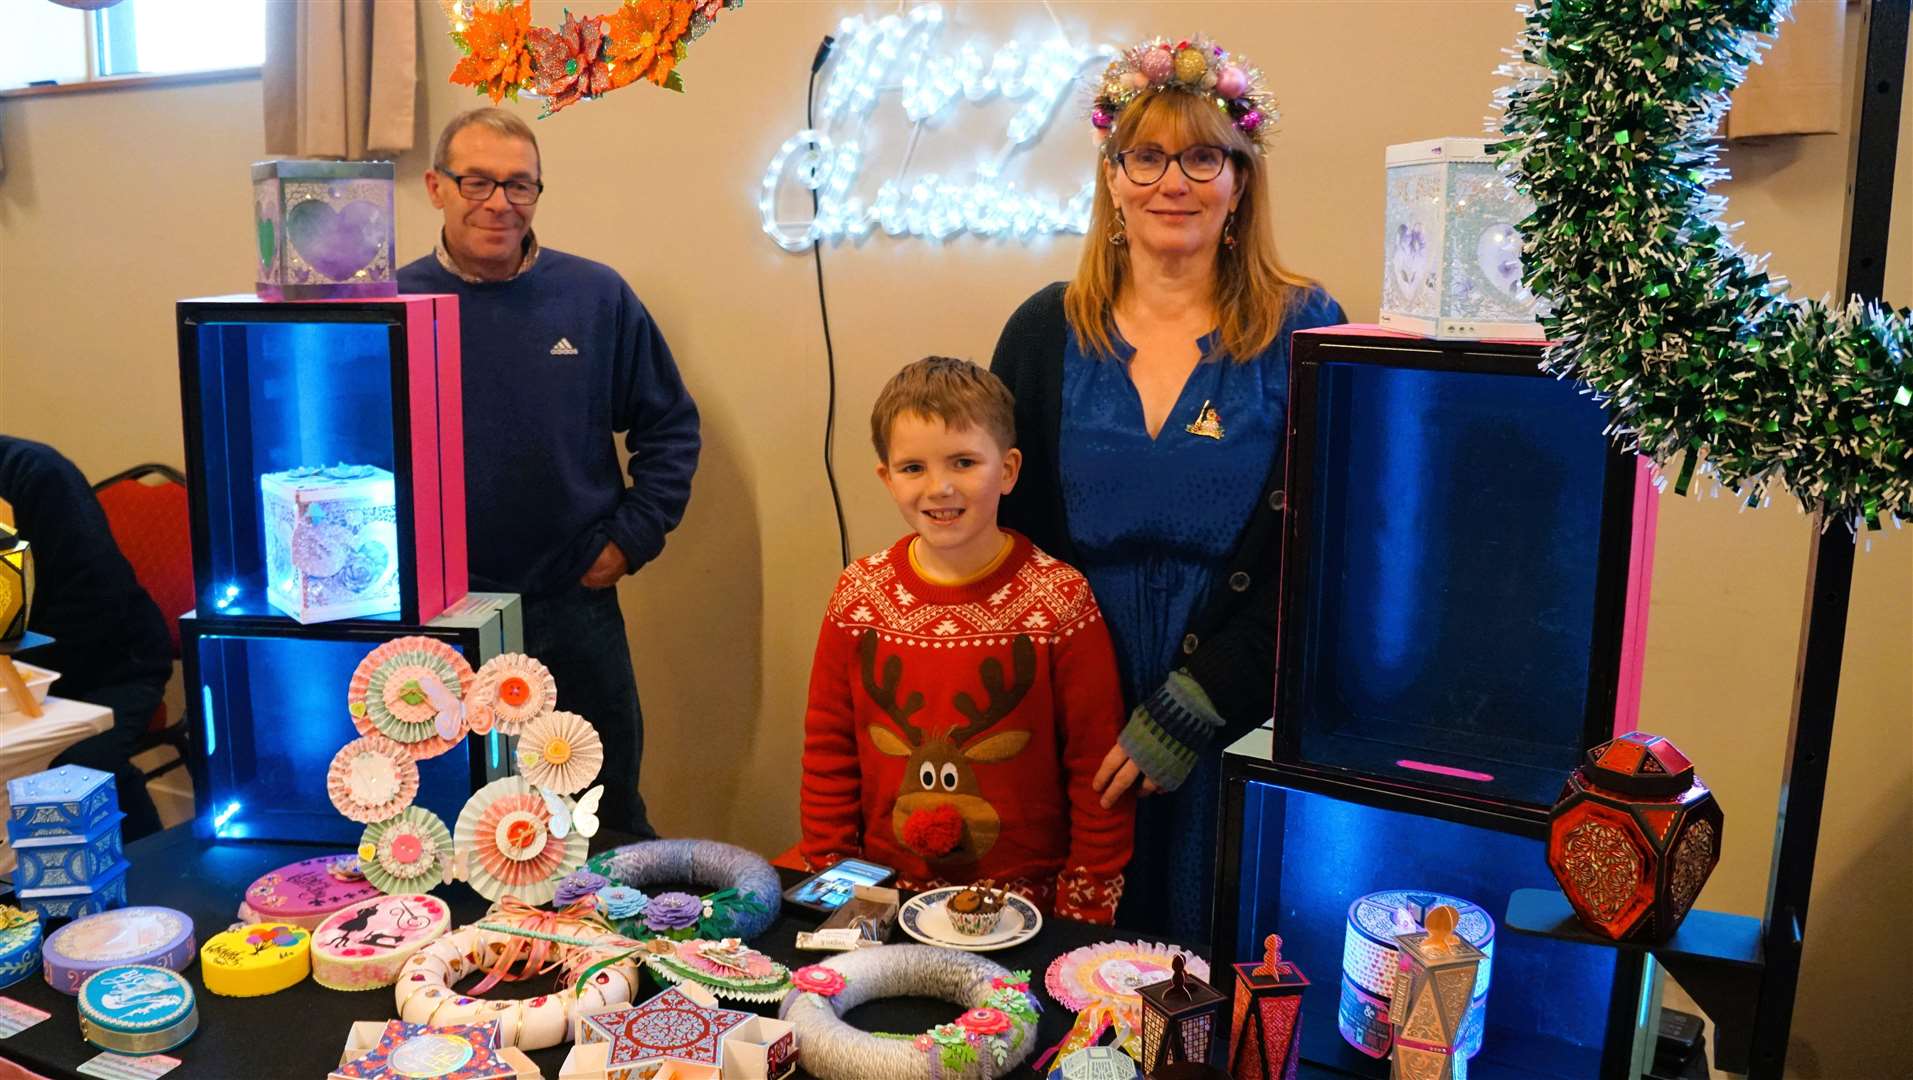 Karan Mackay had her Karans Krafts stall with many bespoke gifts at the event. Picture: DGS